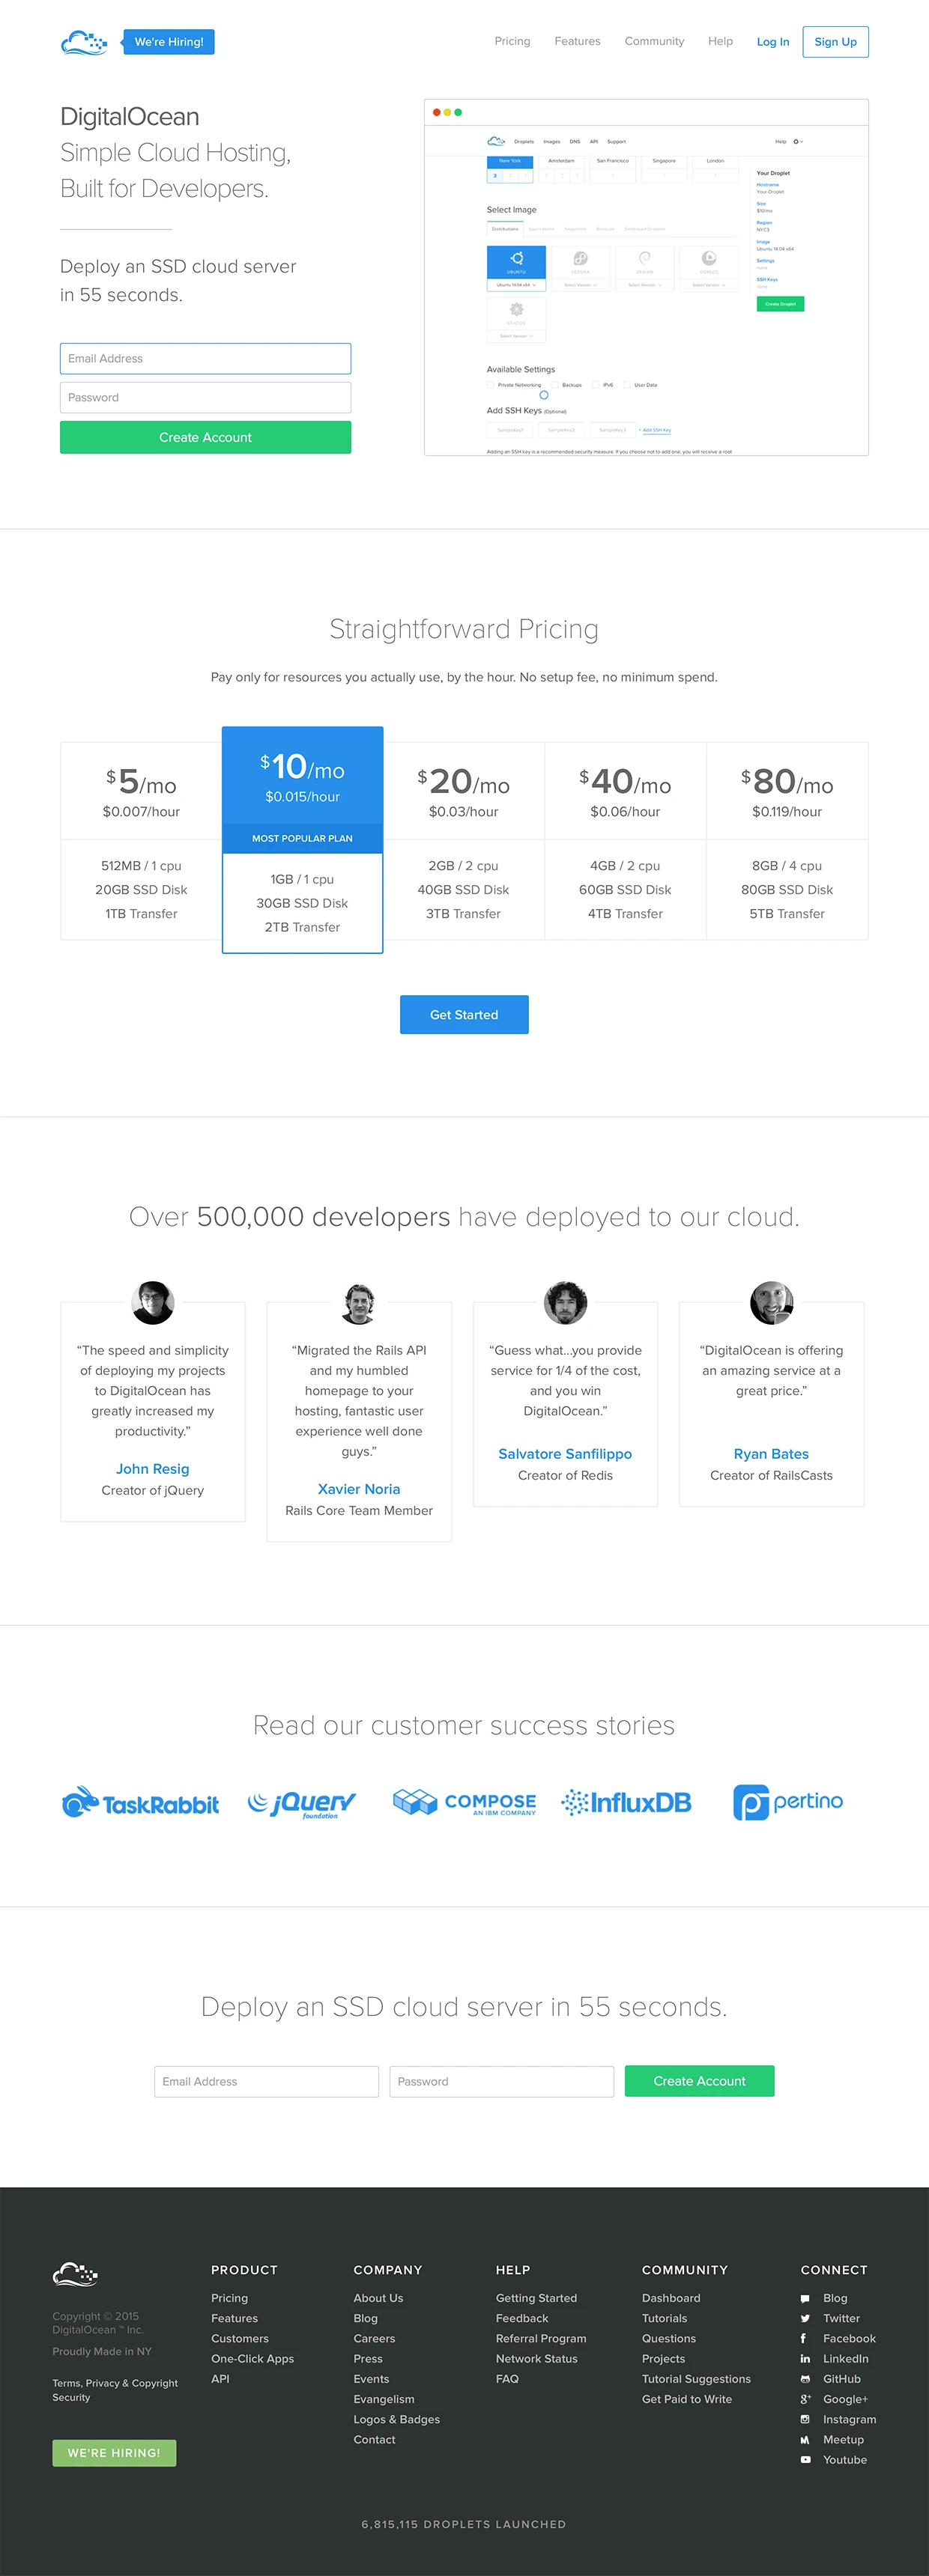 DigitalOcean Landing Page Example: Spin up an SSD cloud server, with full root access, in under a minute. Pricing starts at $5/mo for 512MB RAM, 20GB SSD, 1CPU and 1TB transfer.